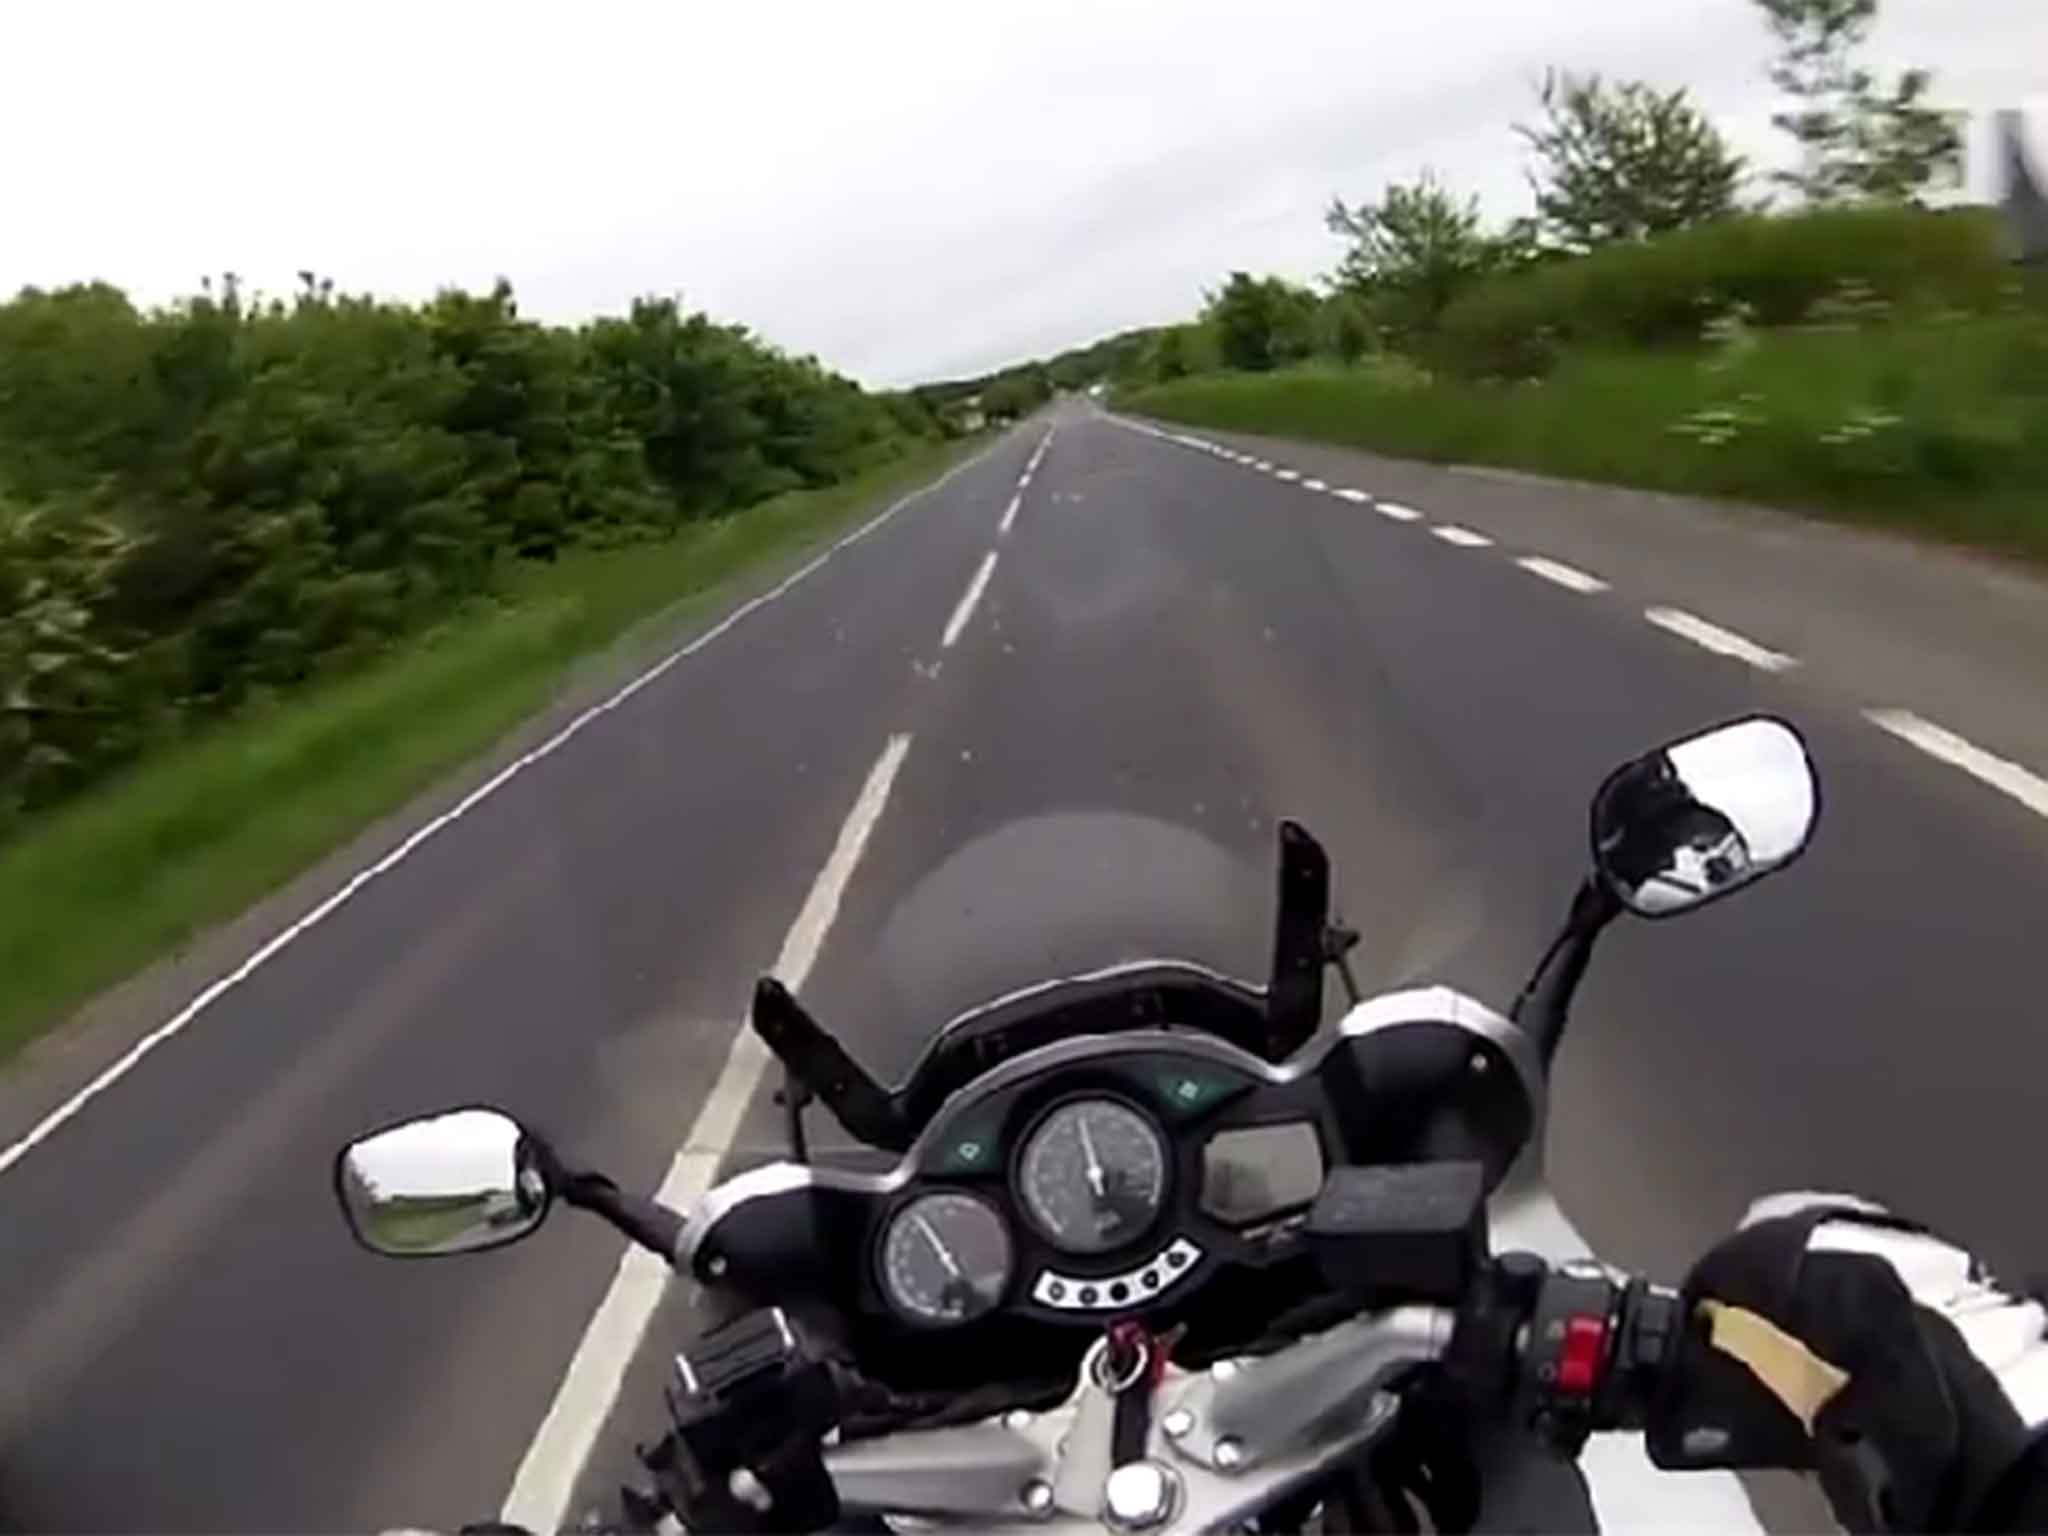 A mother has decided to release devastating footage showing a motorbike crash that killed her son.